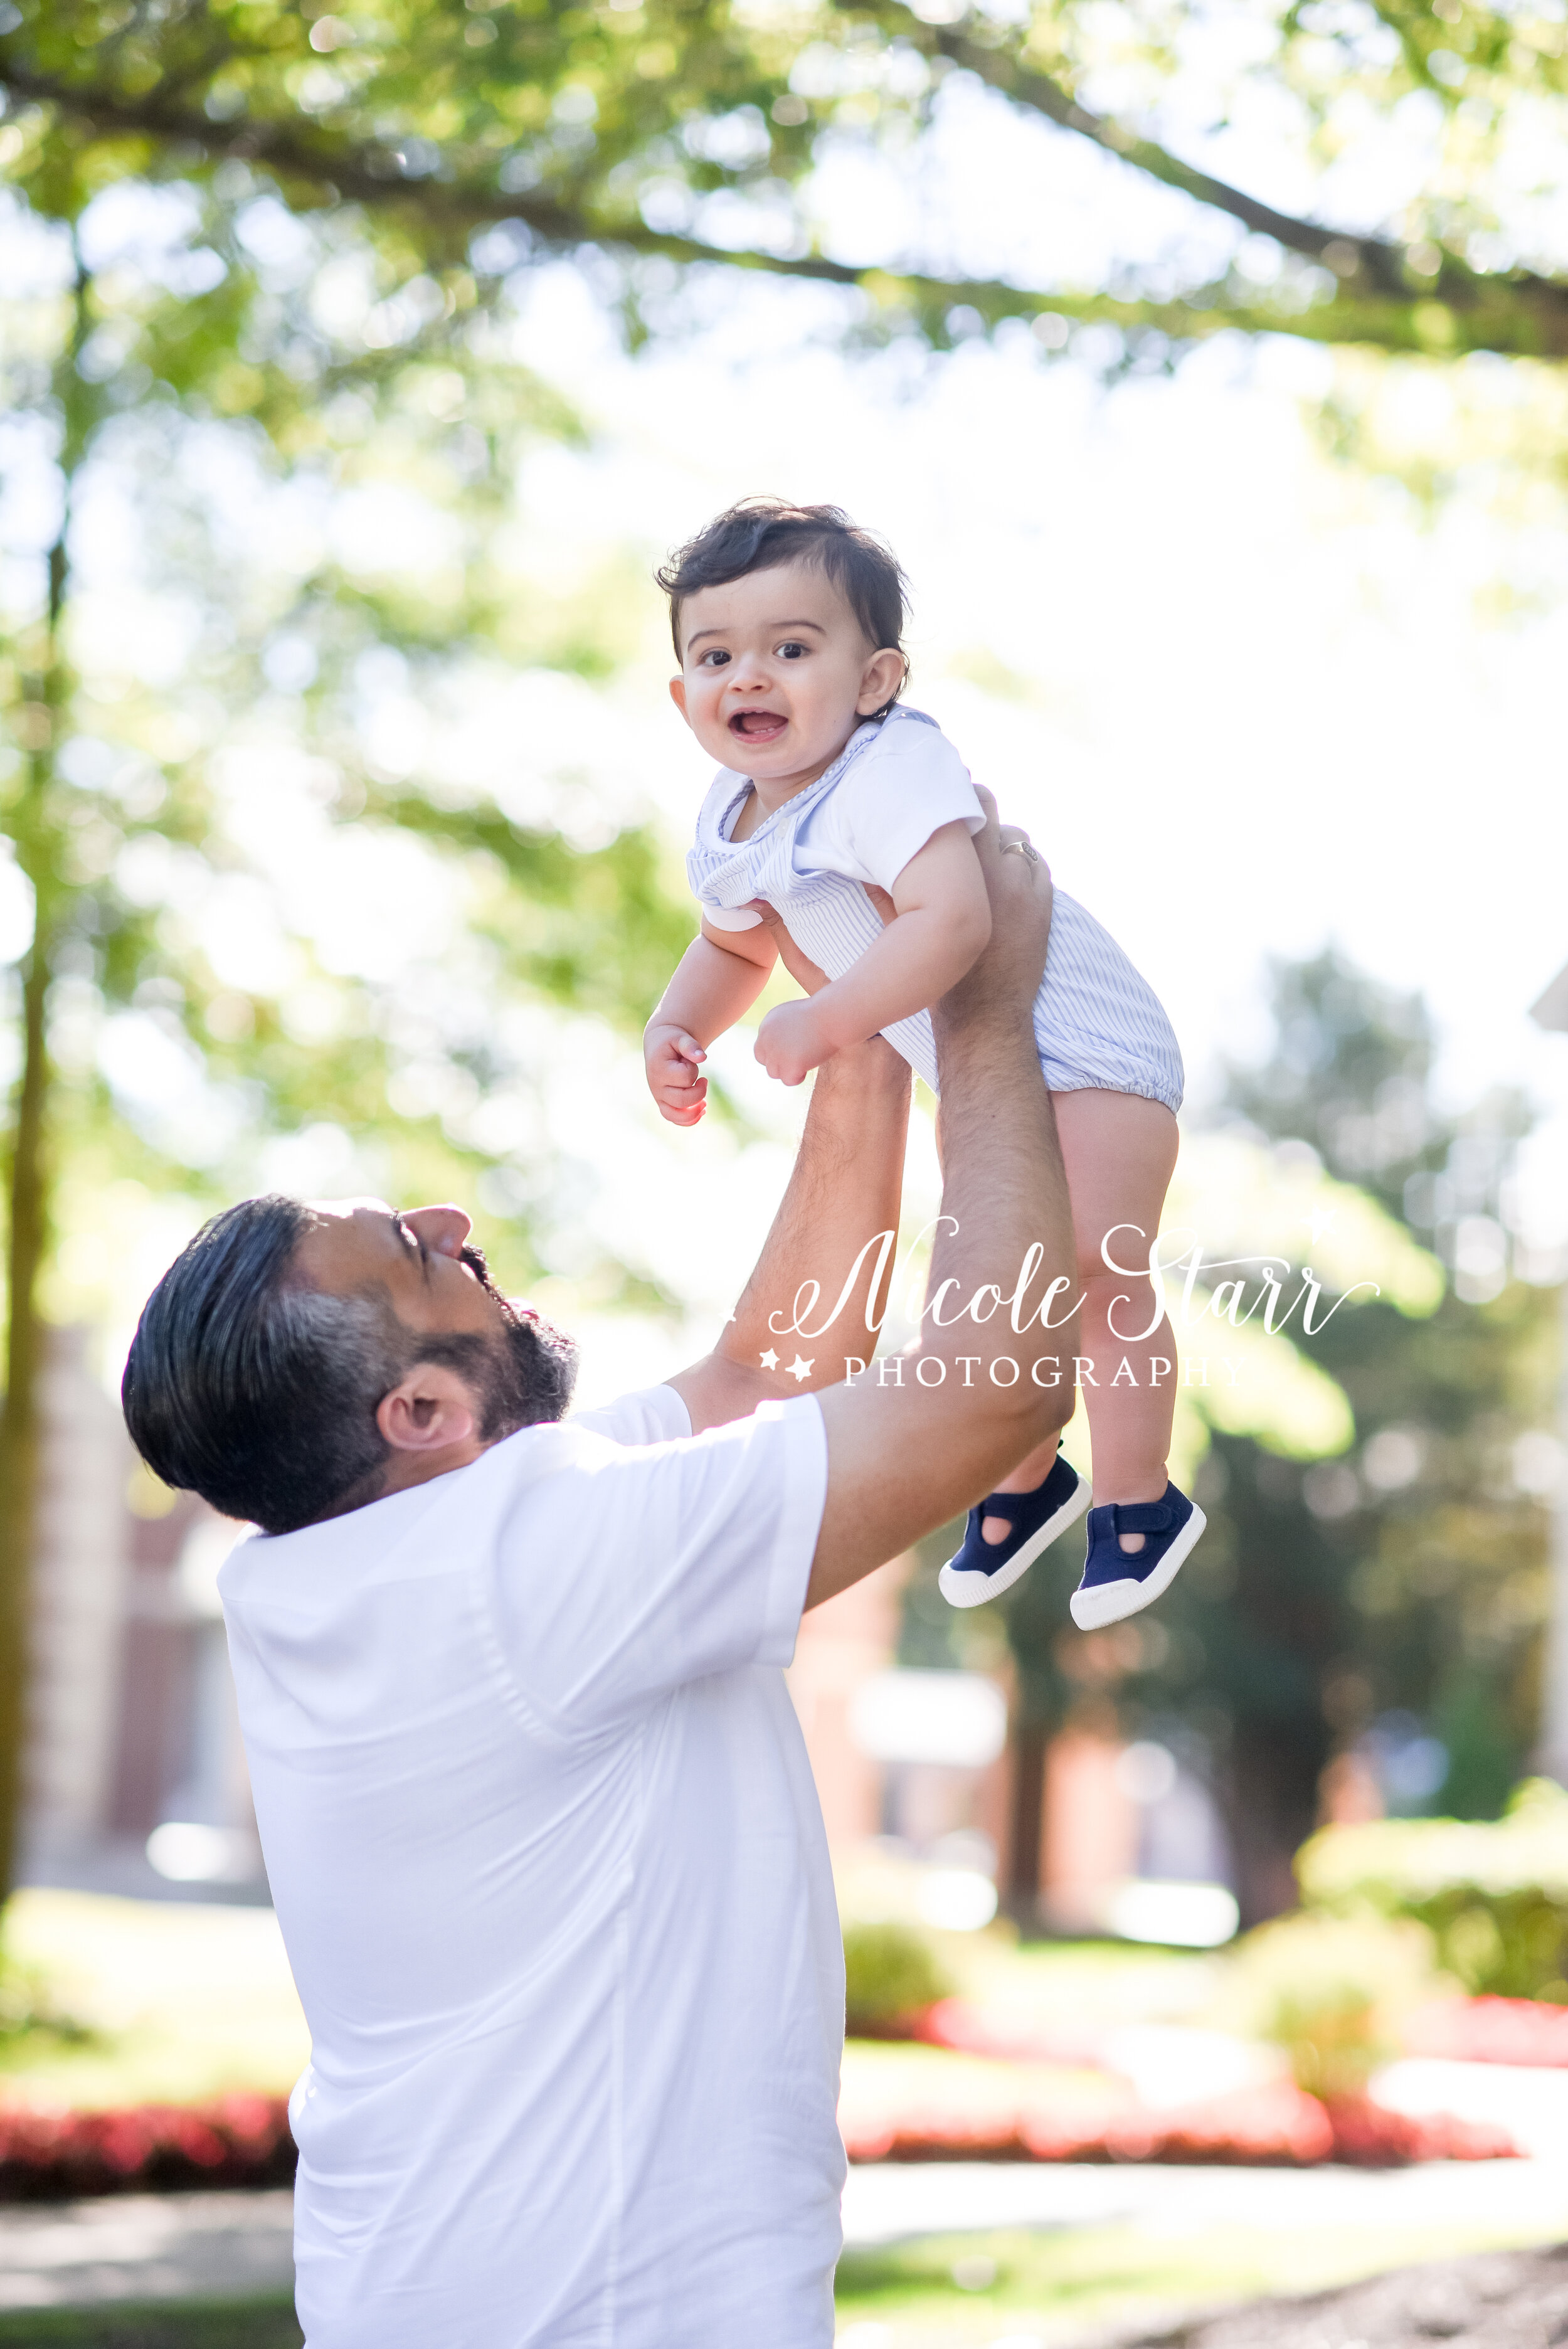 Picture Perfect Ideas for Your New Home Photo Shoot - Michelle Clardie